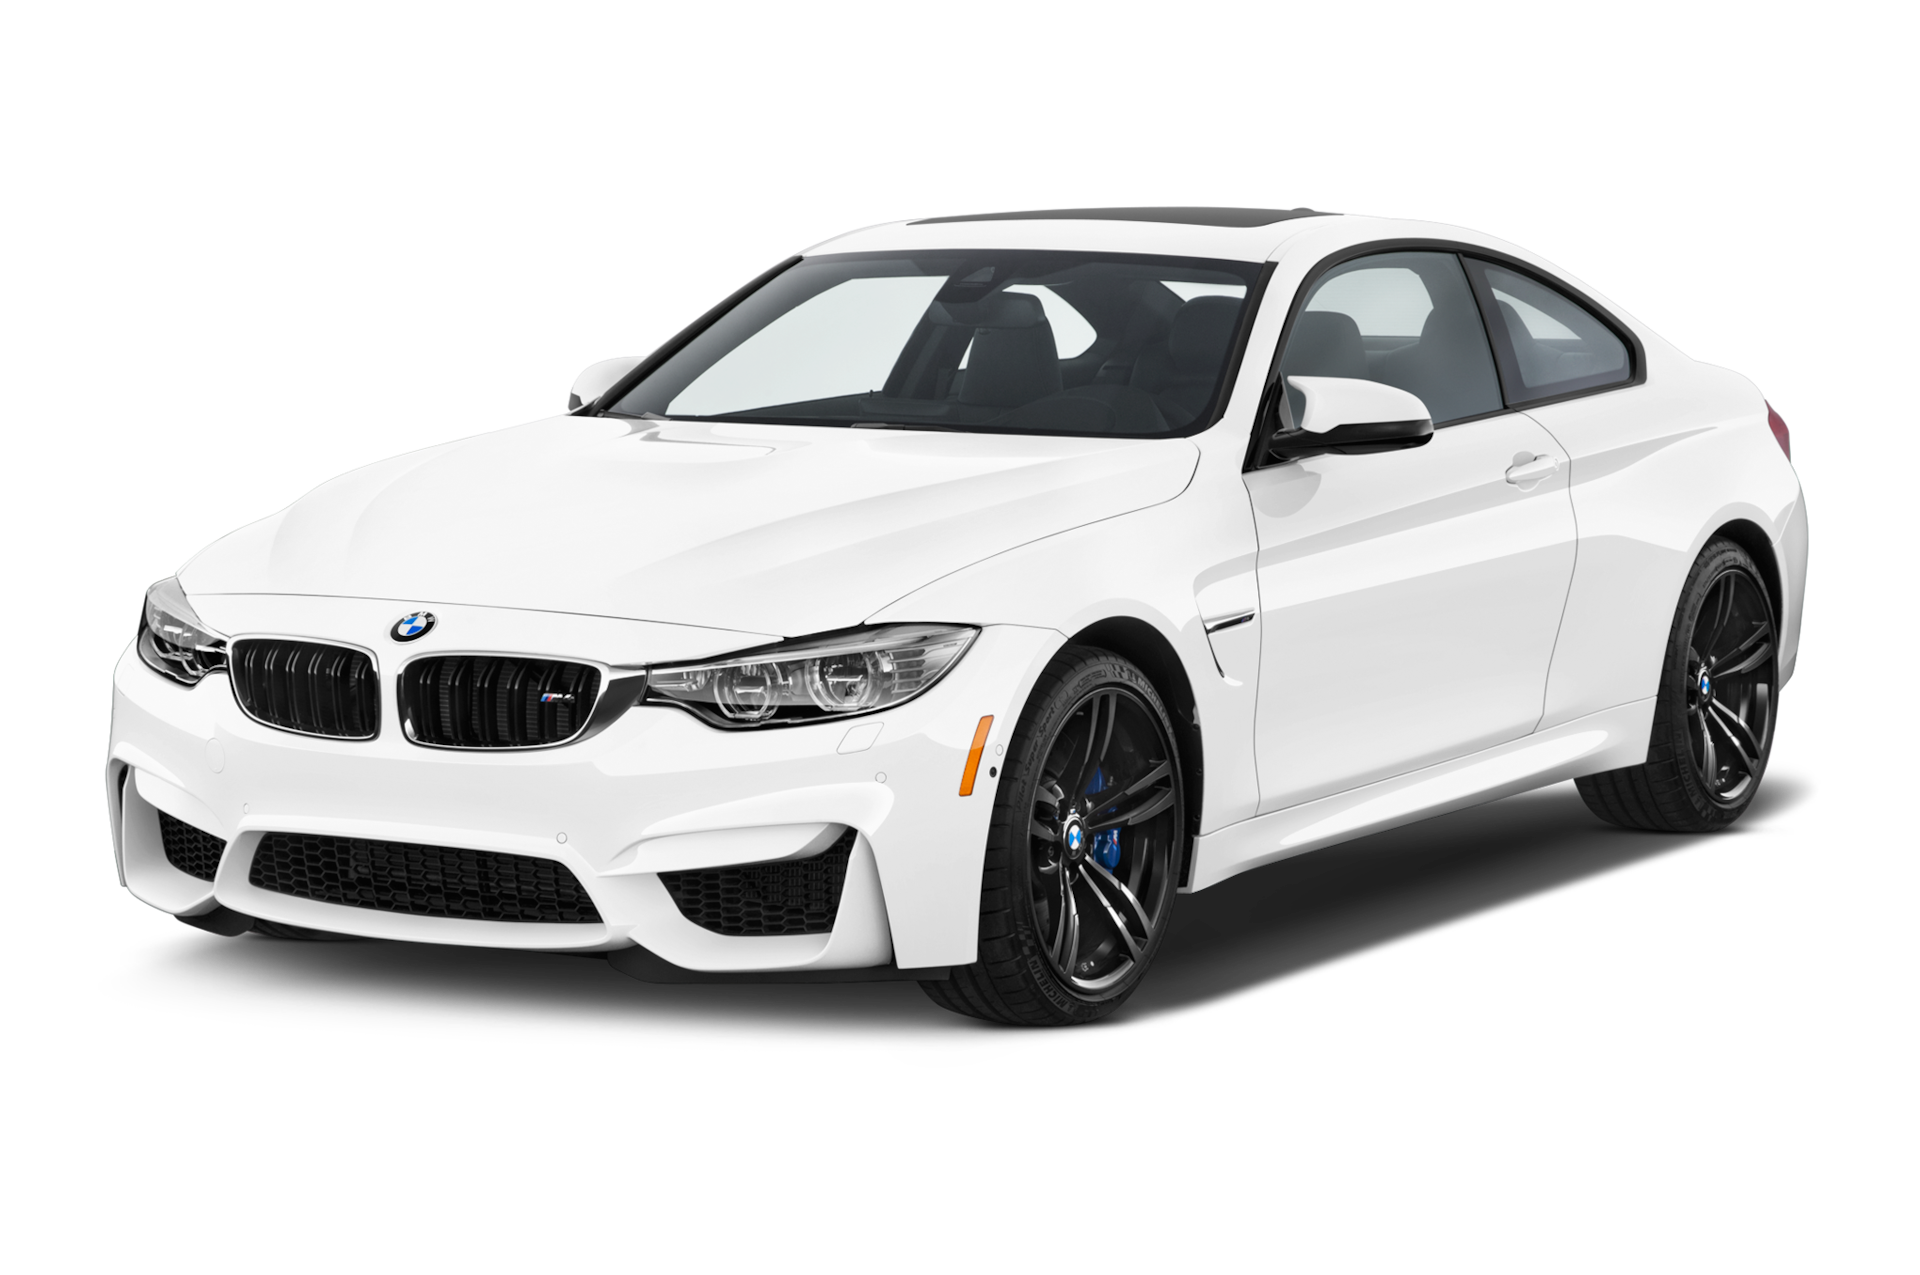 2017 BMW M4 Prices, Reviews, and Photos - MotorTrend